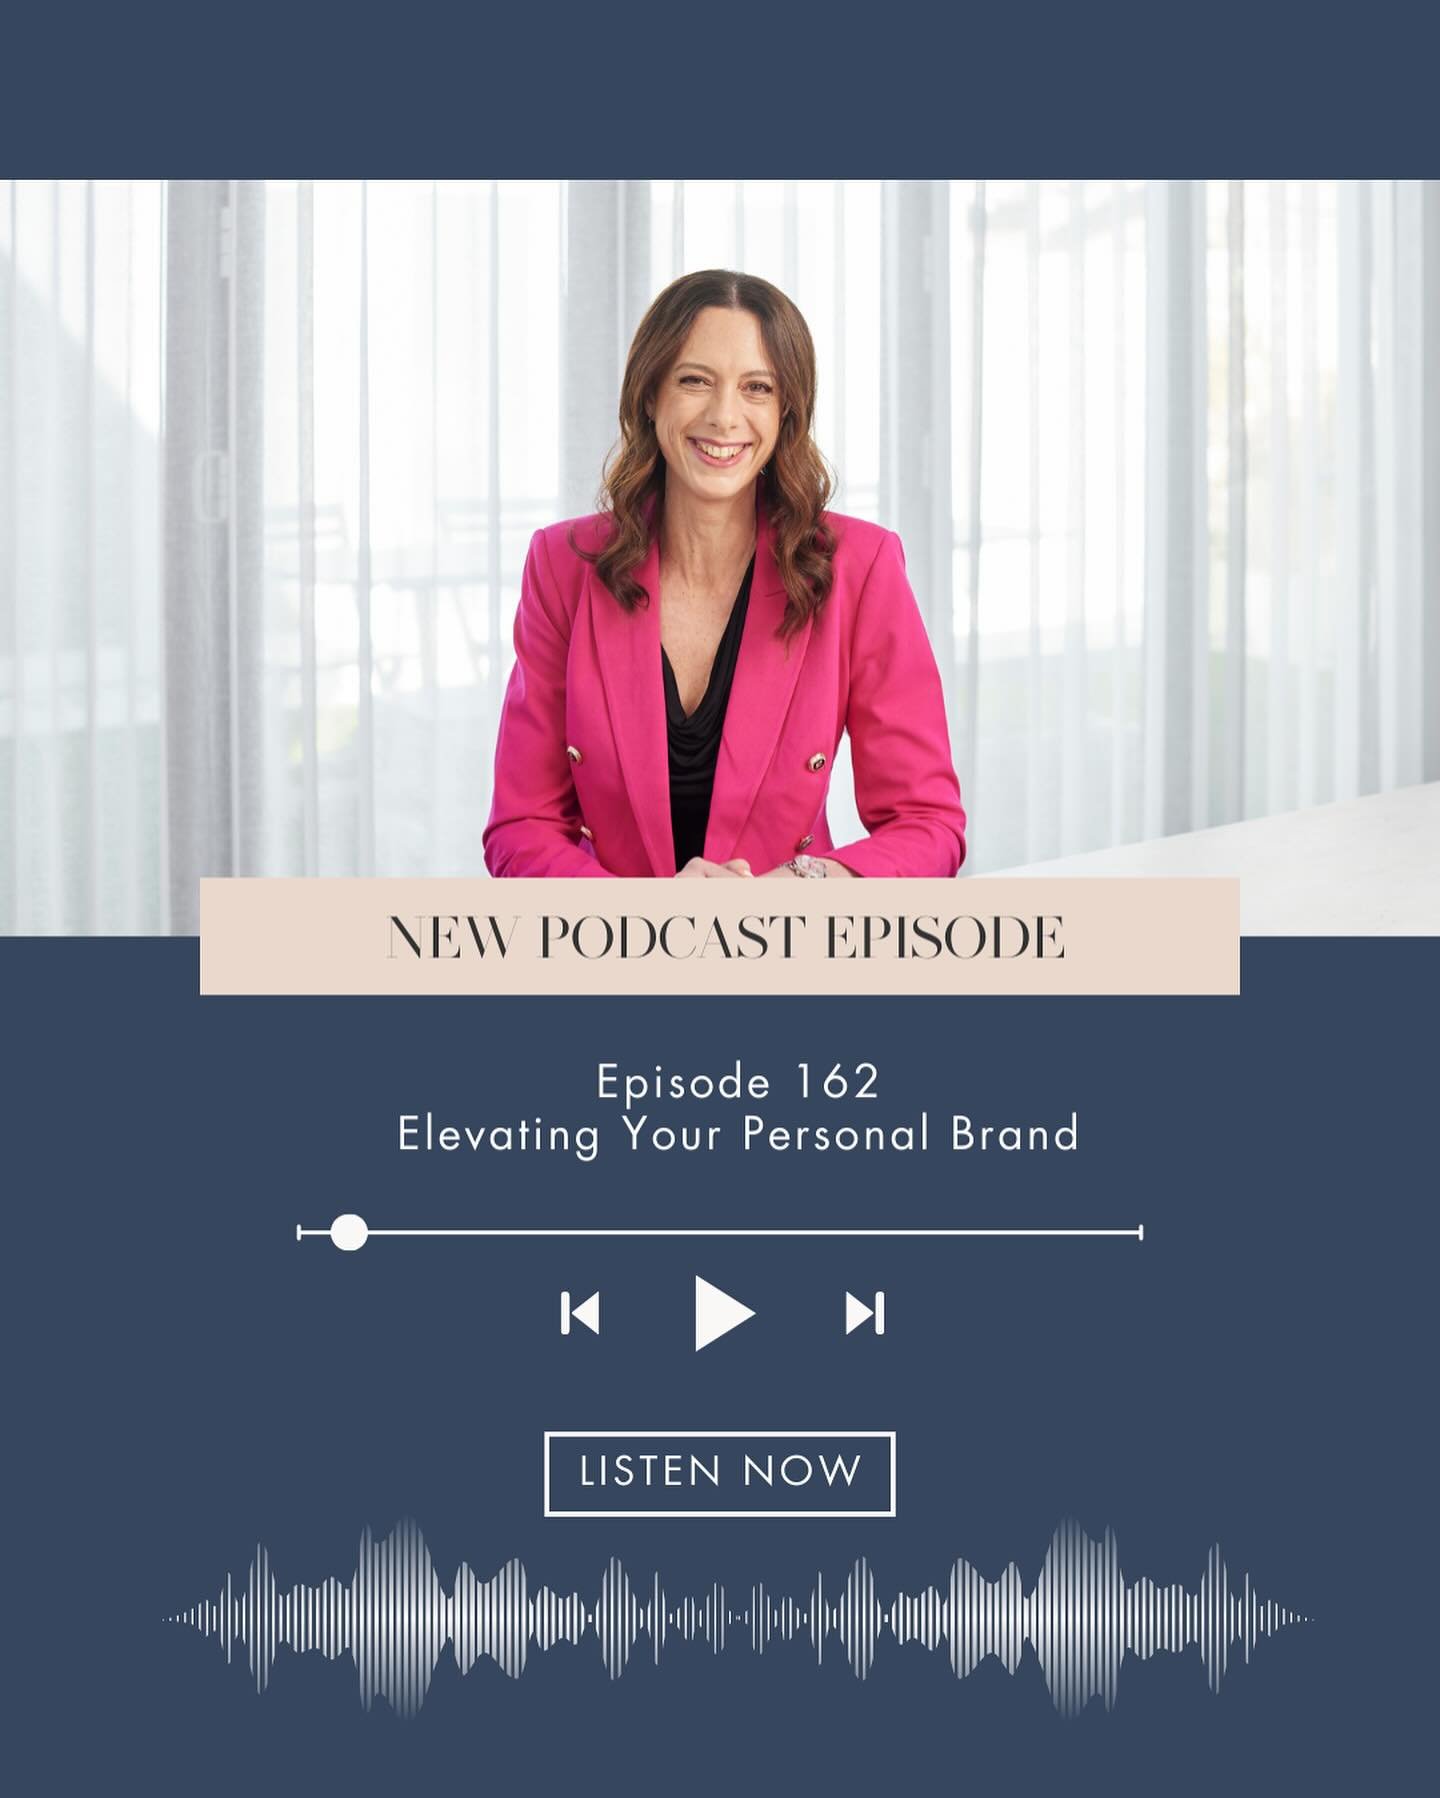 Today on the podcast we&rsquo;re talking about personal branding and why it&rsquo;s essential for online experts and service-based business owners to elevate their personal brand.

Join me for episode 162 of 🎙The Debra Shepherd Podcast. Available on